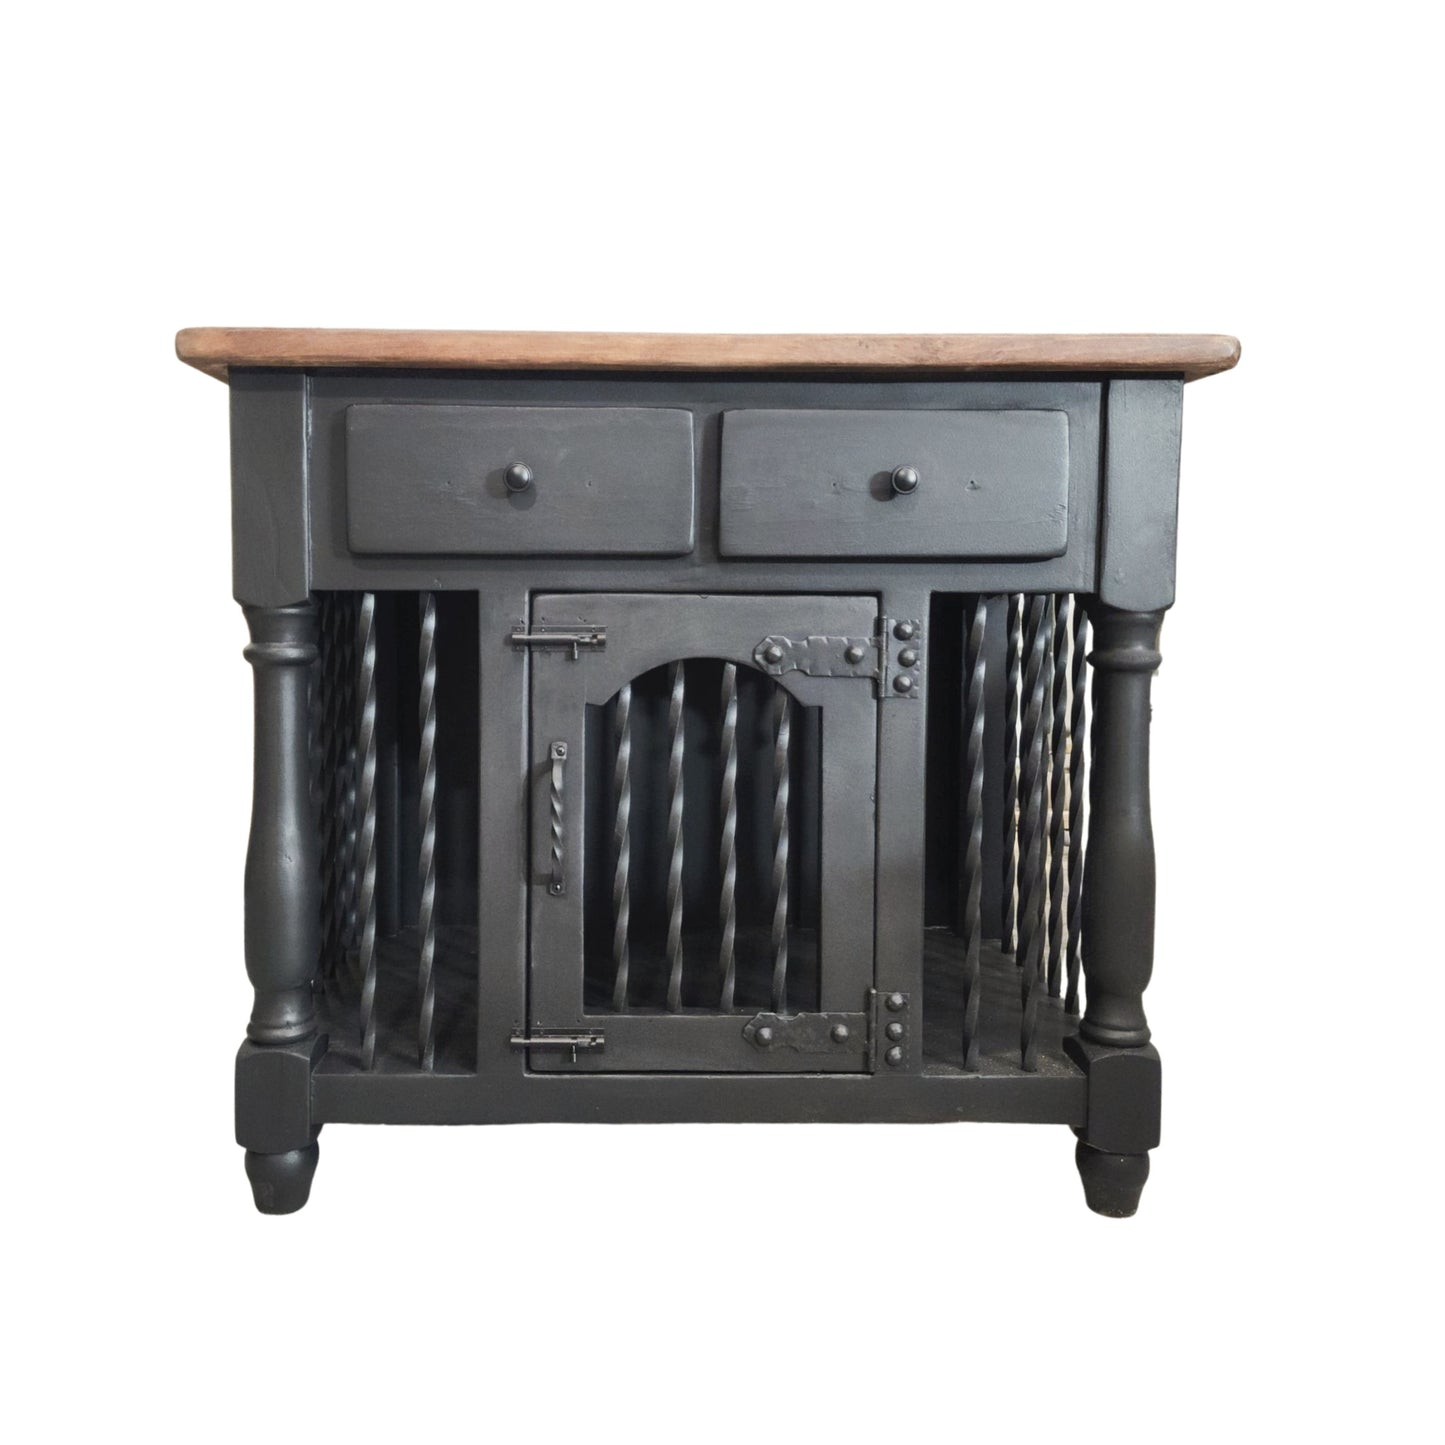 Dog crate furniture - Pottary Barn Cottage Single door with Two drawers